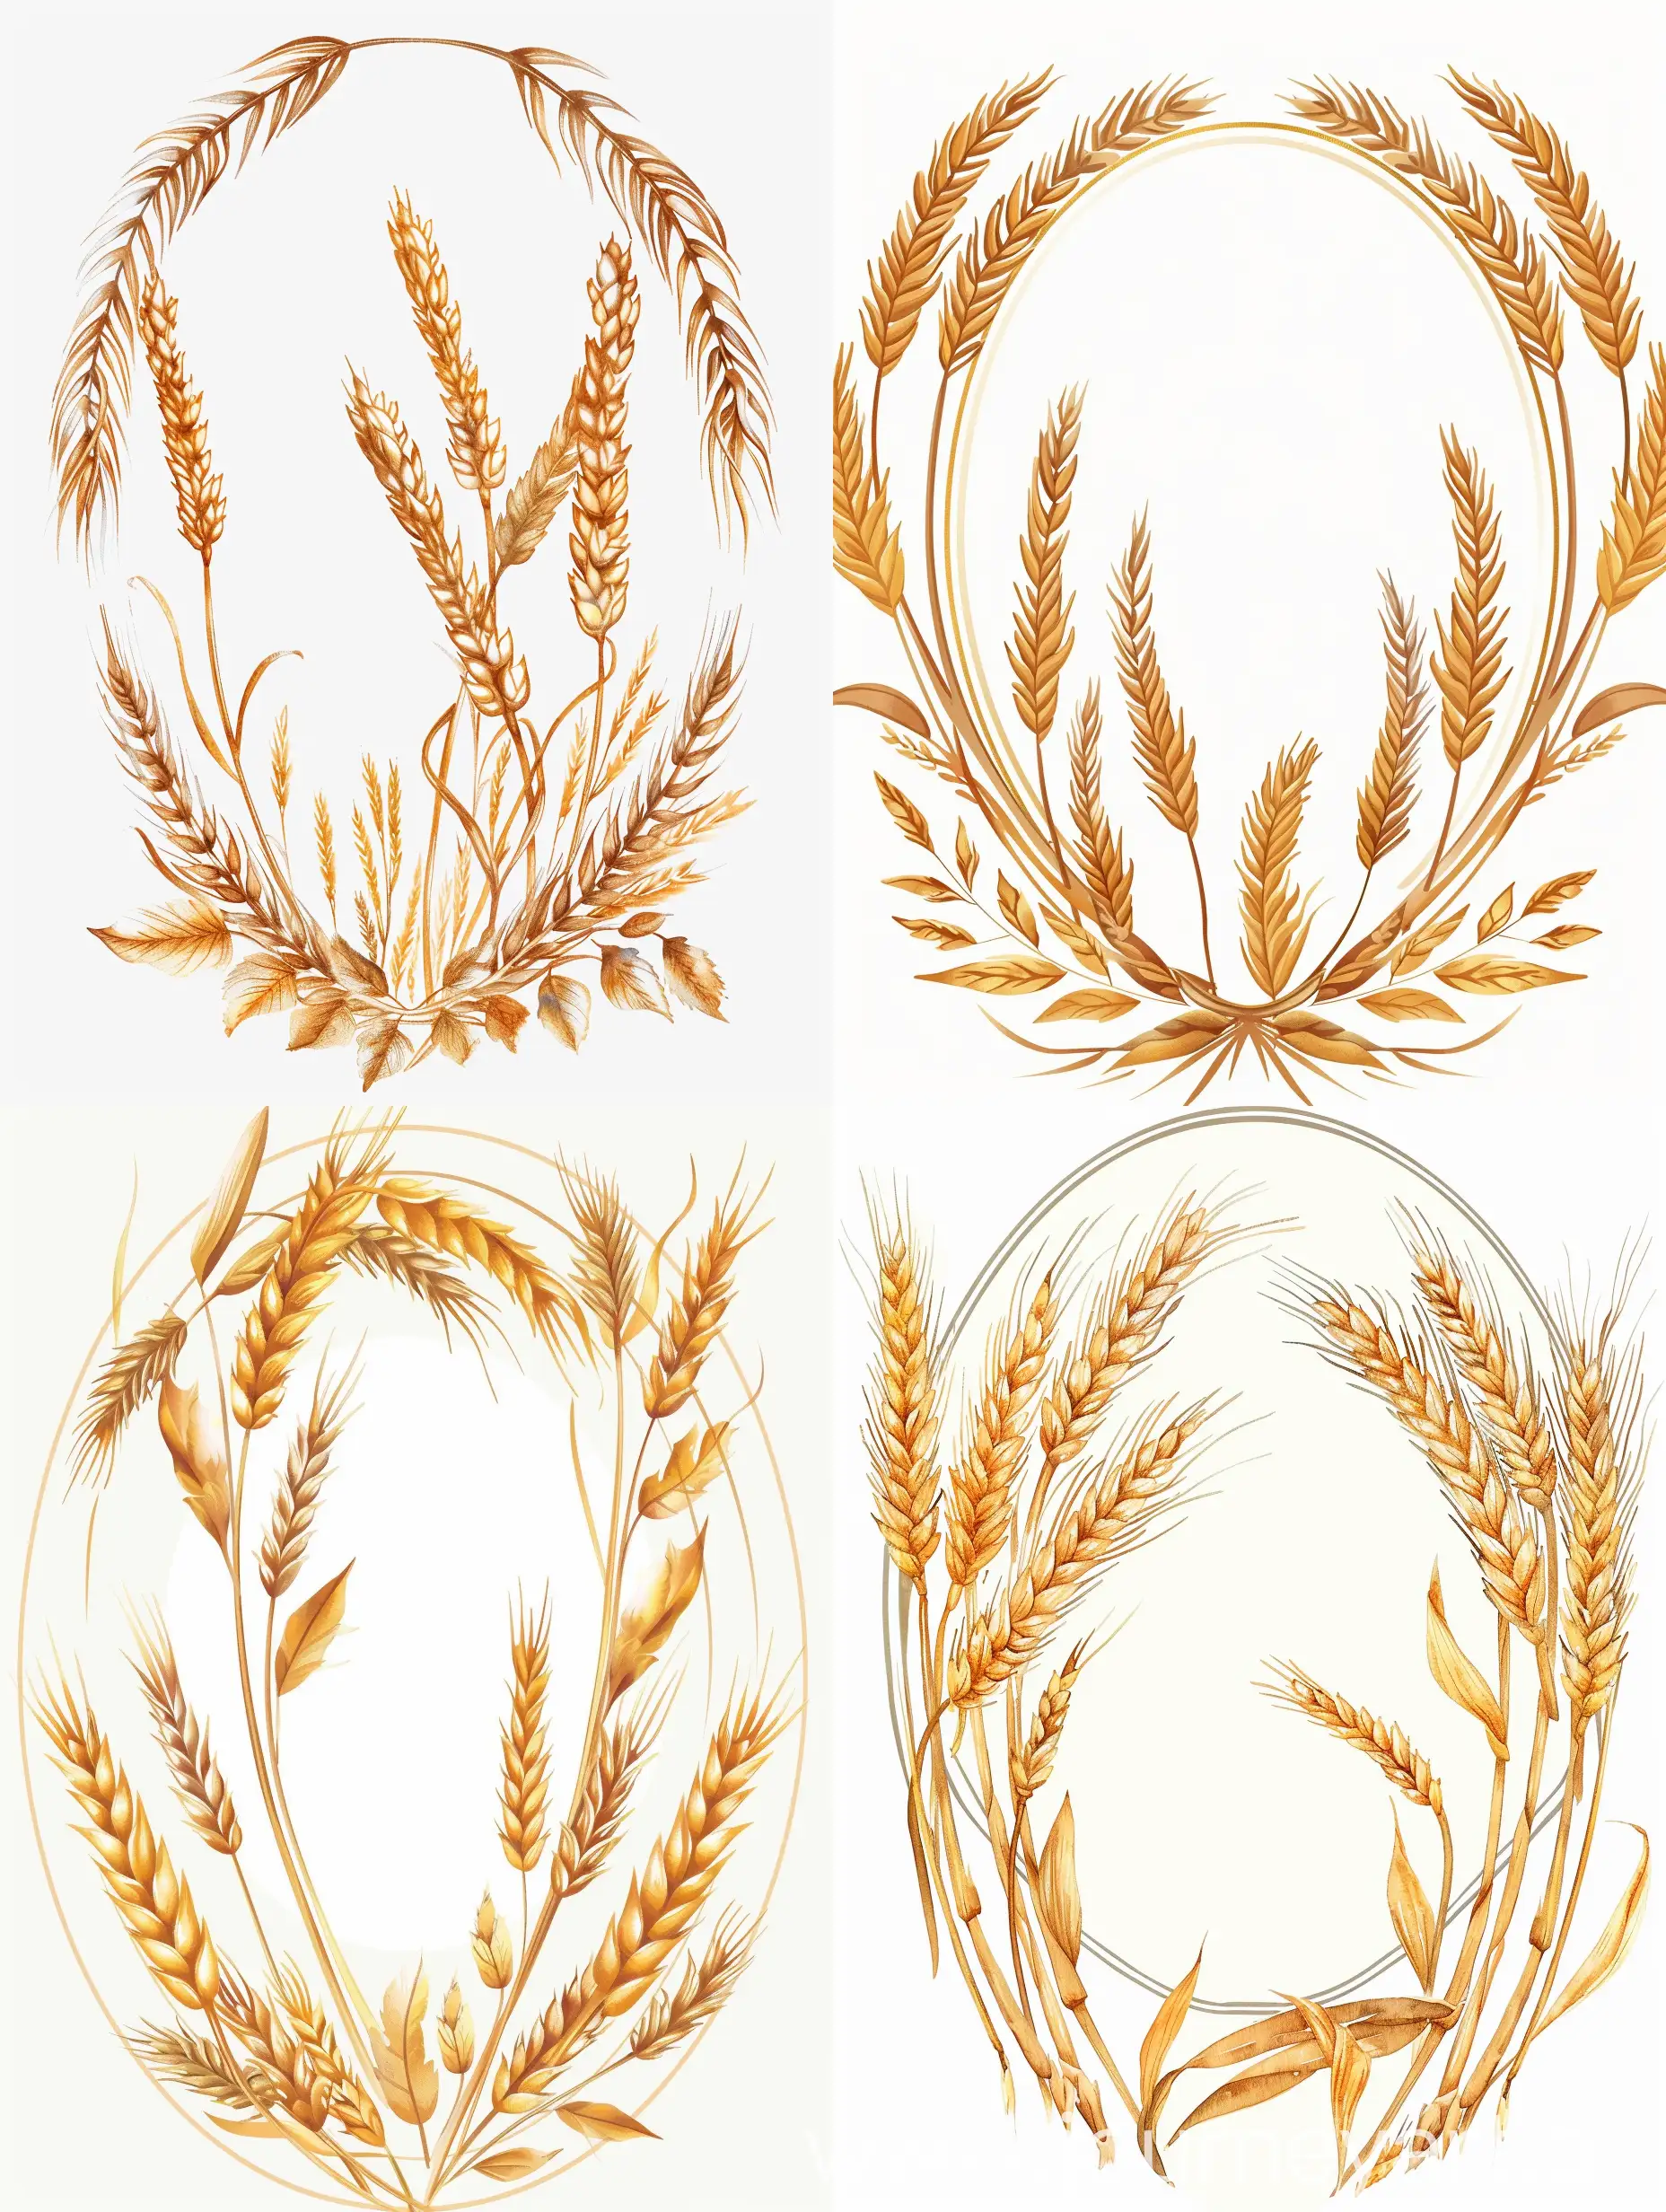 The frame is oval, ornamental, consisting of intertwined wheat spikelets, with long wheat leaves, natural elements of a wheat field, on a white background, flat illustration, watercolor style